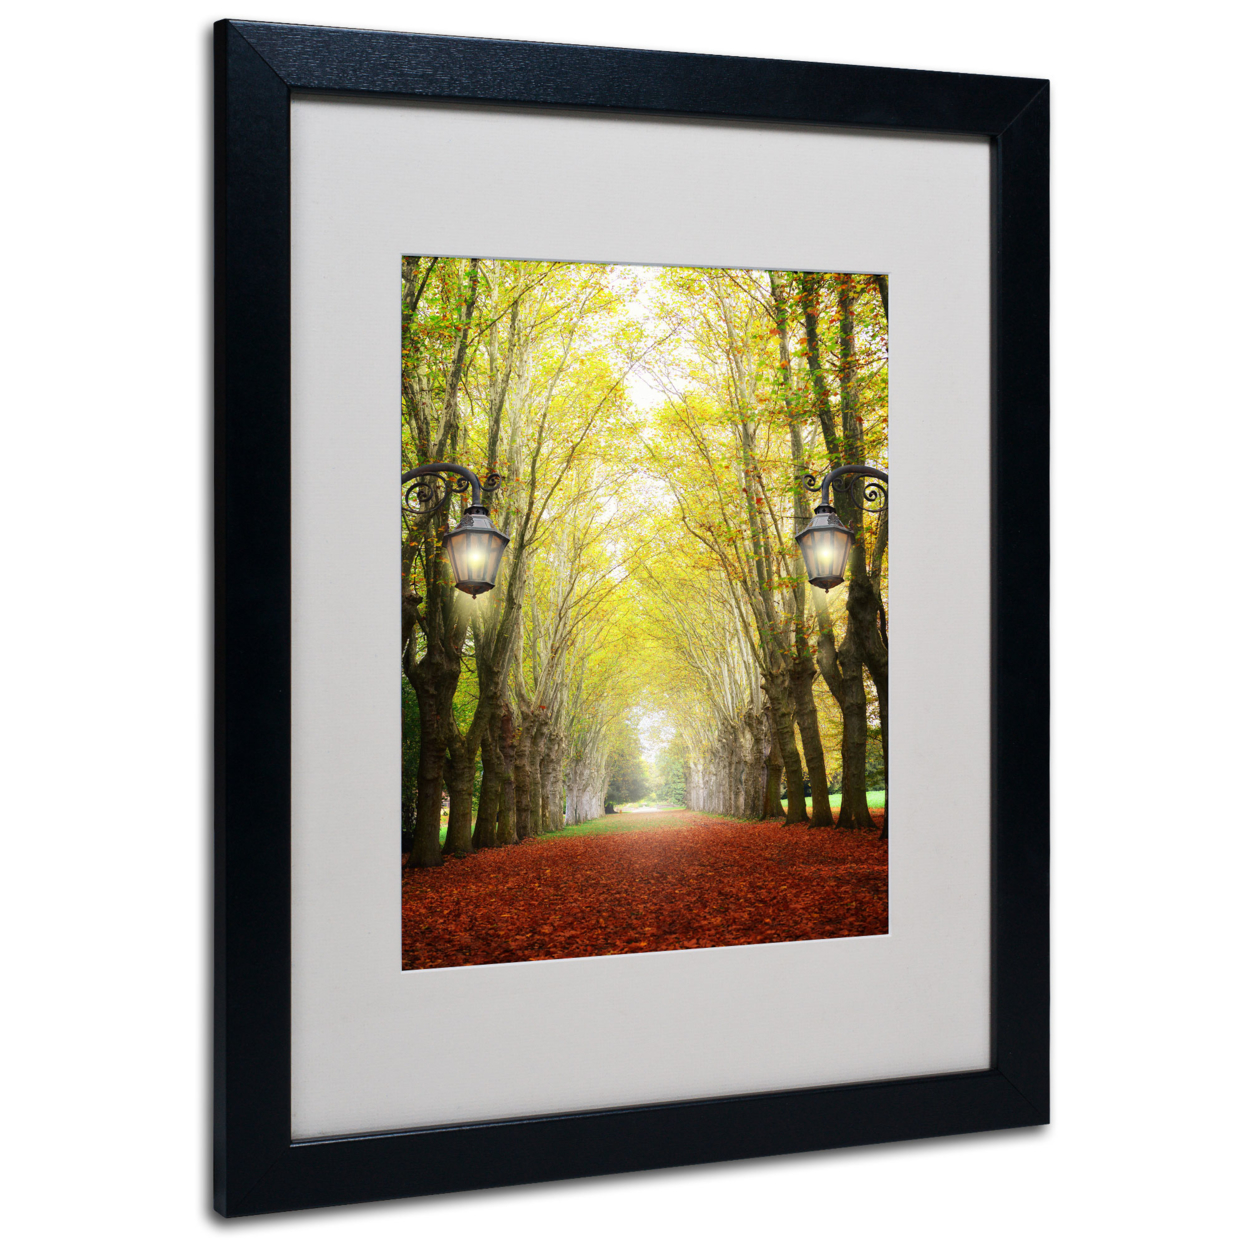 Philippe Sainte-Laudy 'Plane Tree Alley' Black Wooden Framed Art 18 X 22 Inches